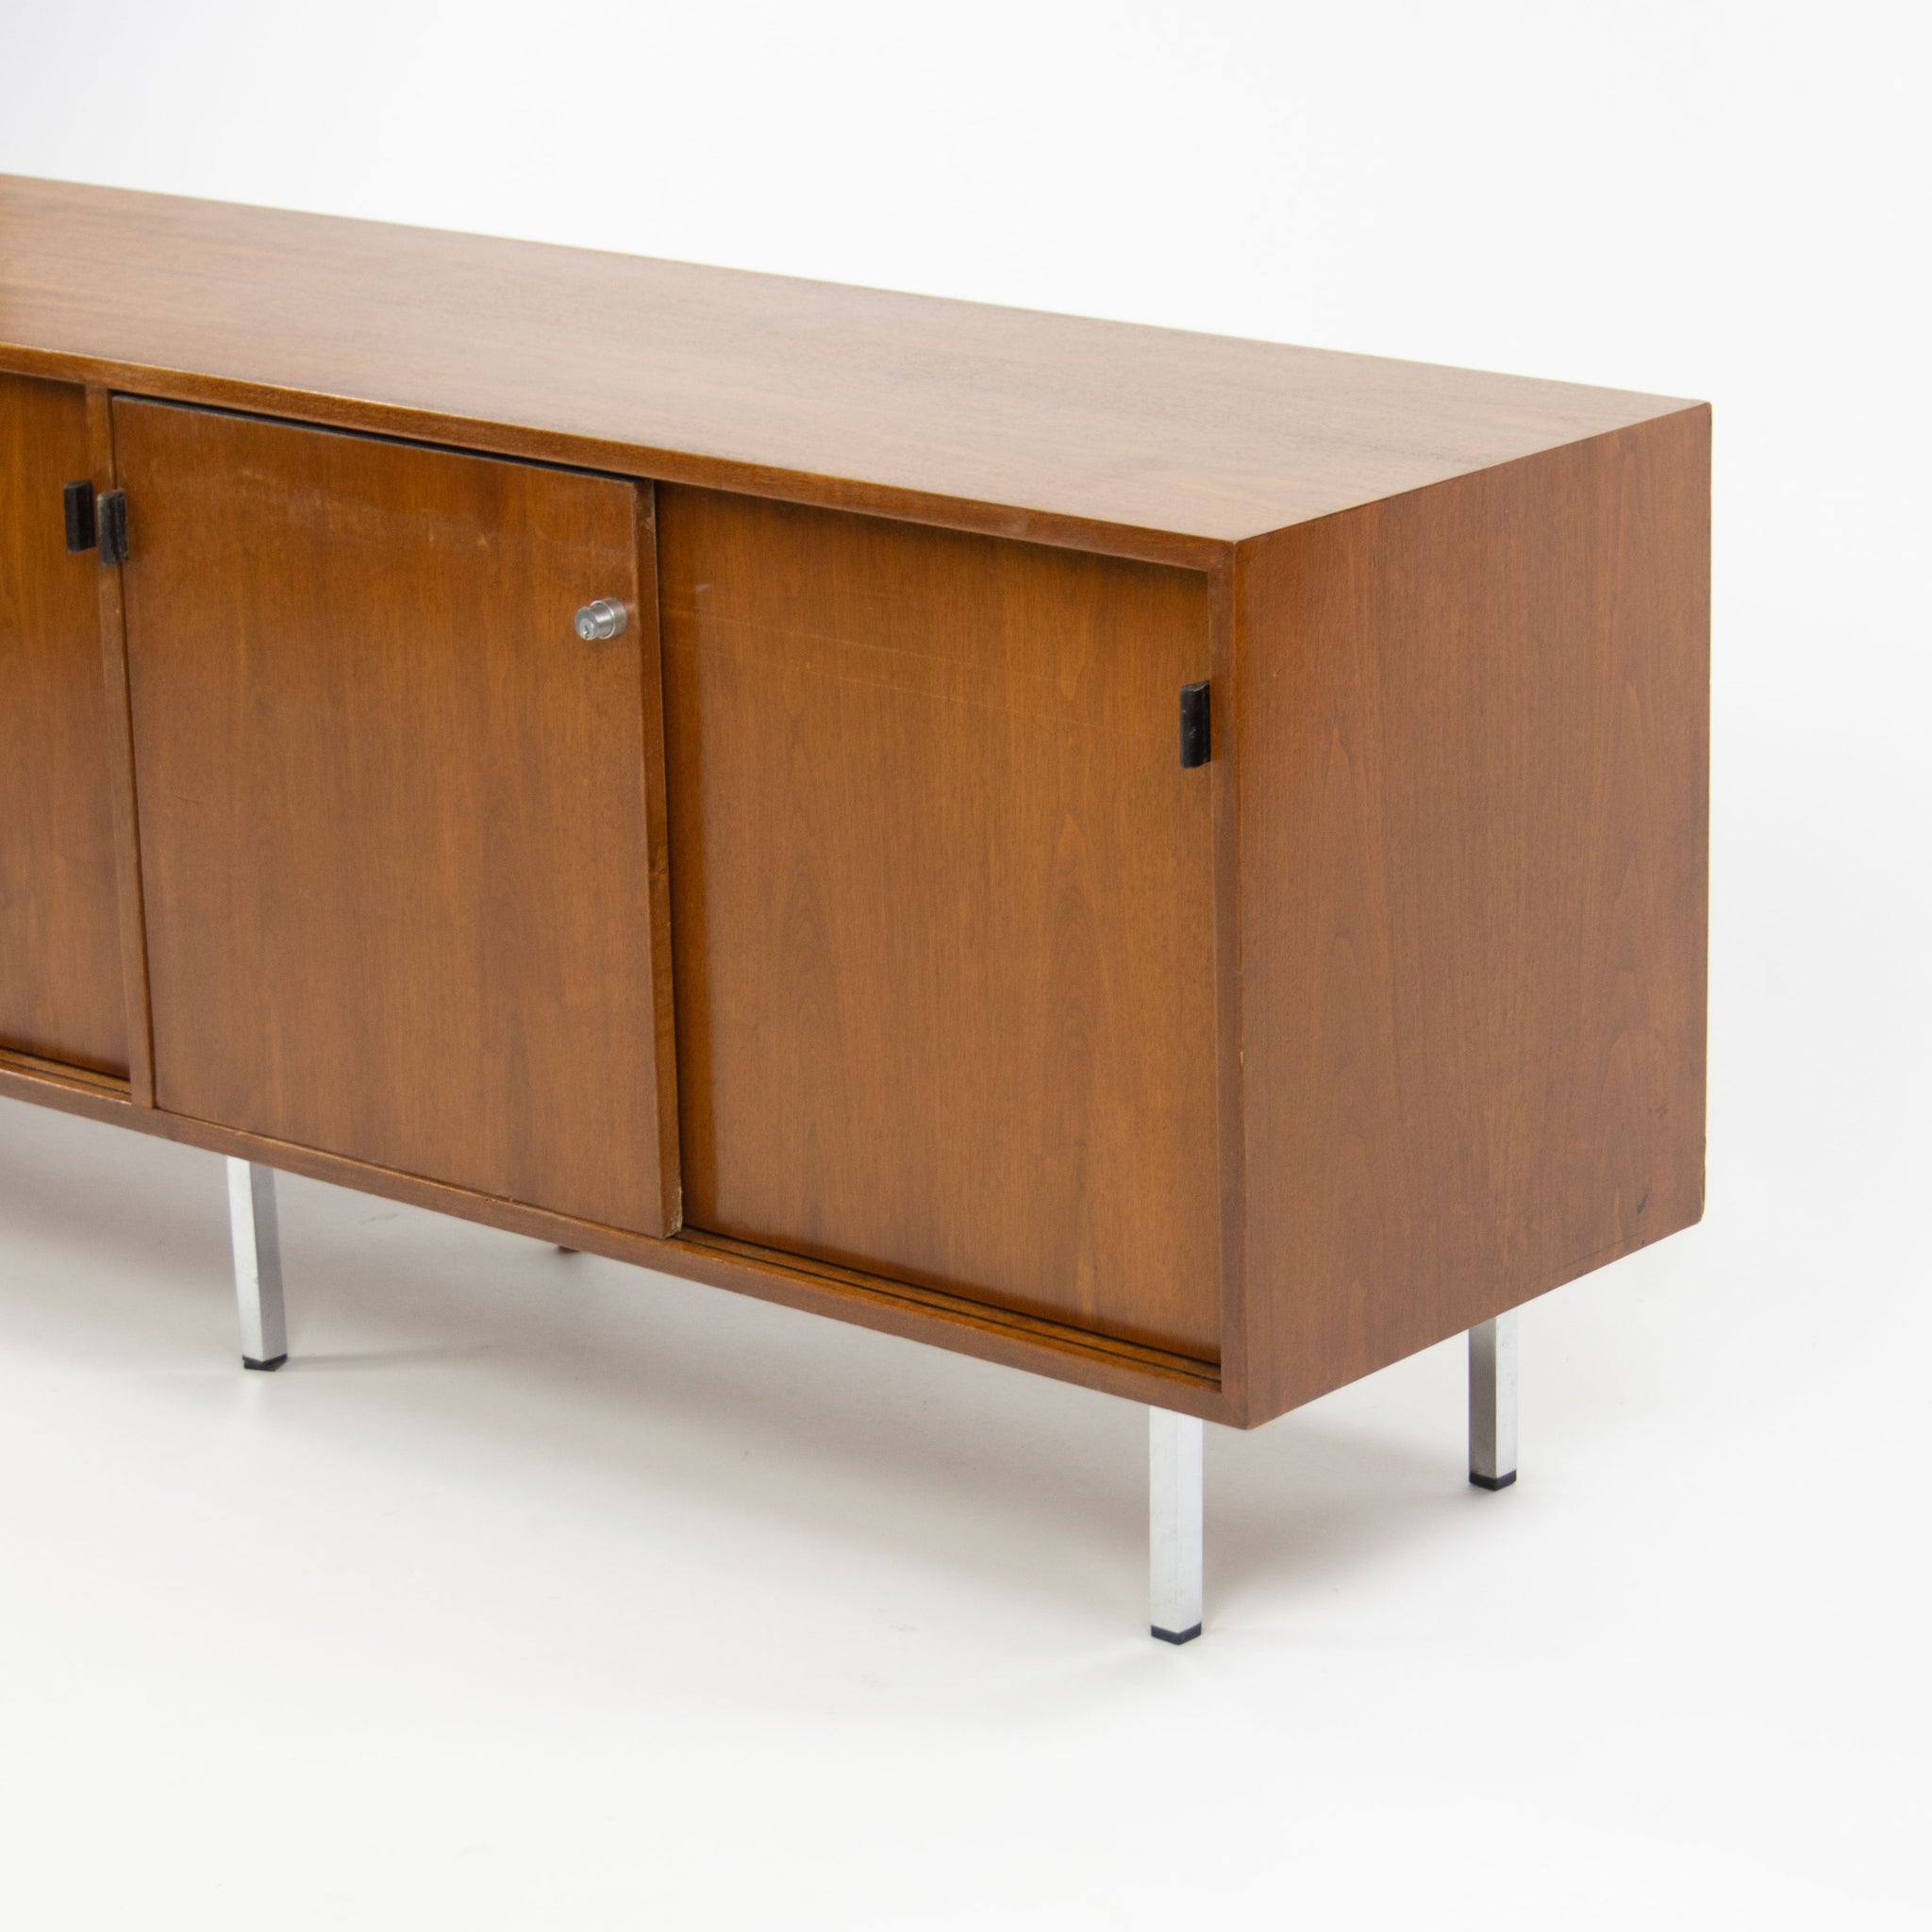 SOLD 1960's Vintage Florence Knoll Walnut and Leather Credenza Cabinet Sideboard